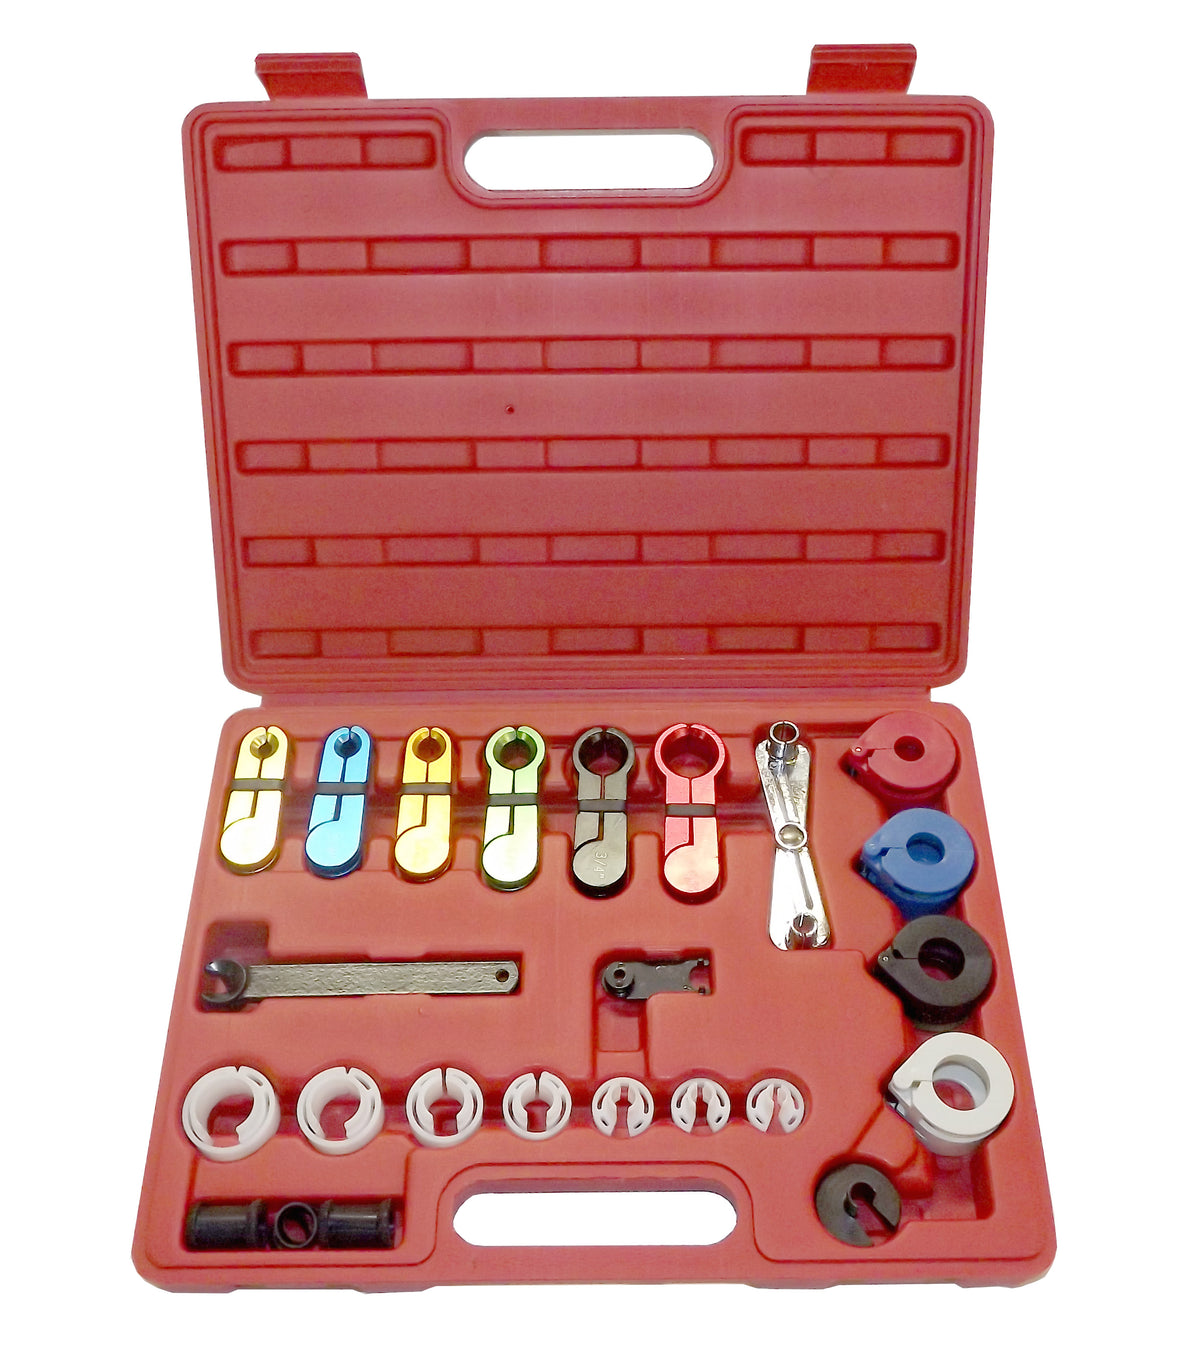 Fuel and AC Line Disconnection Tool Kit - tool